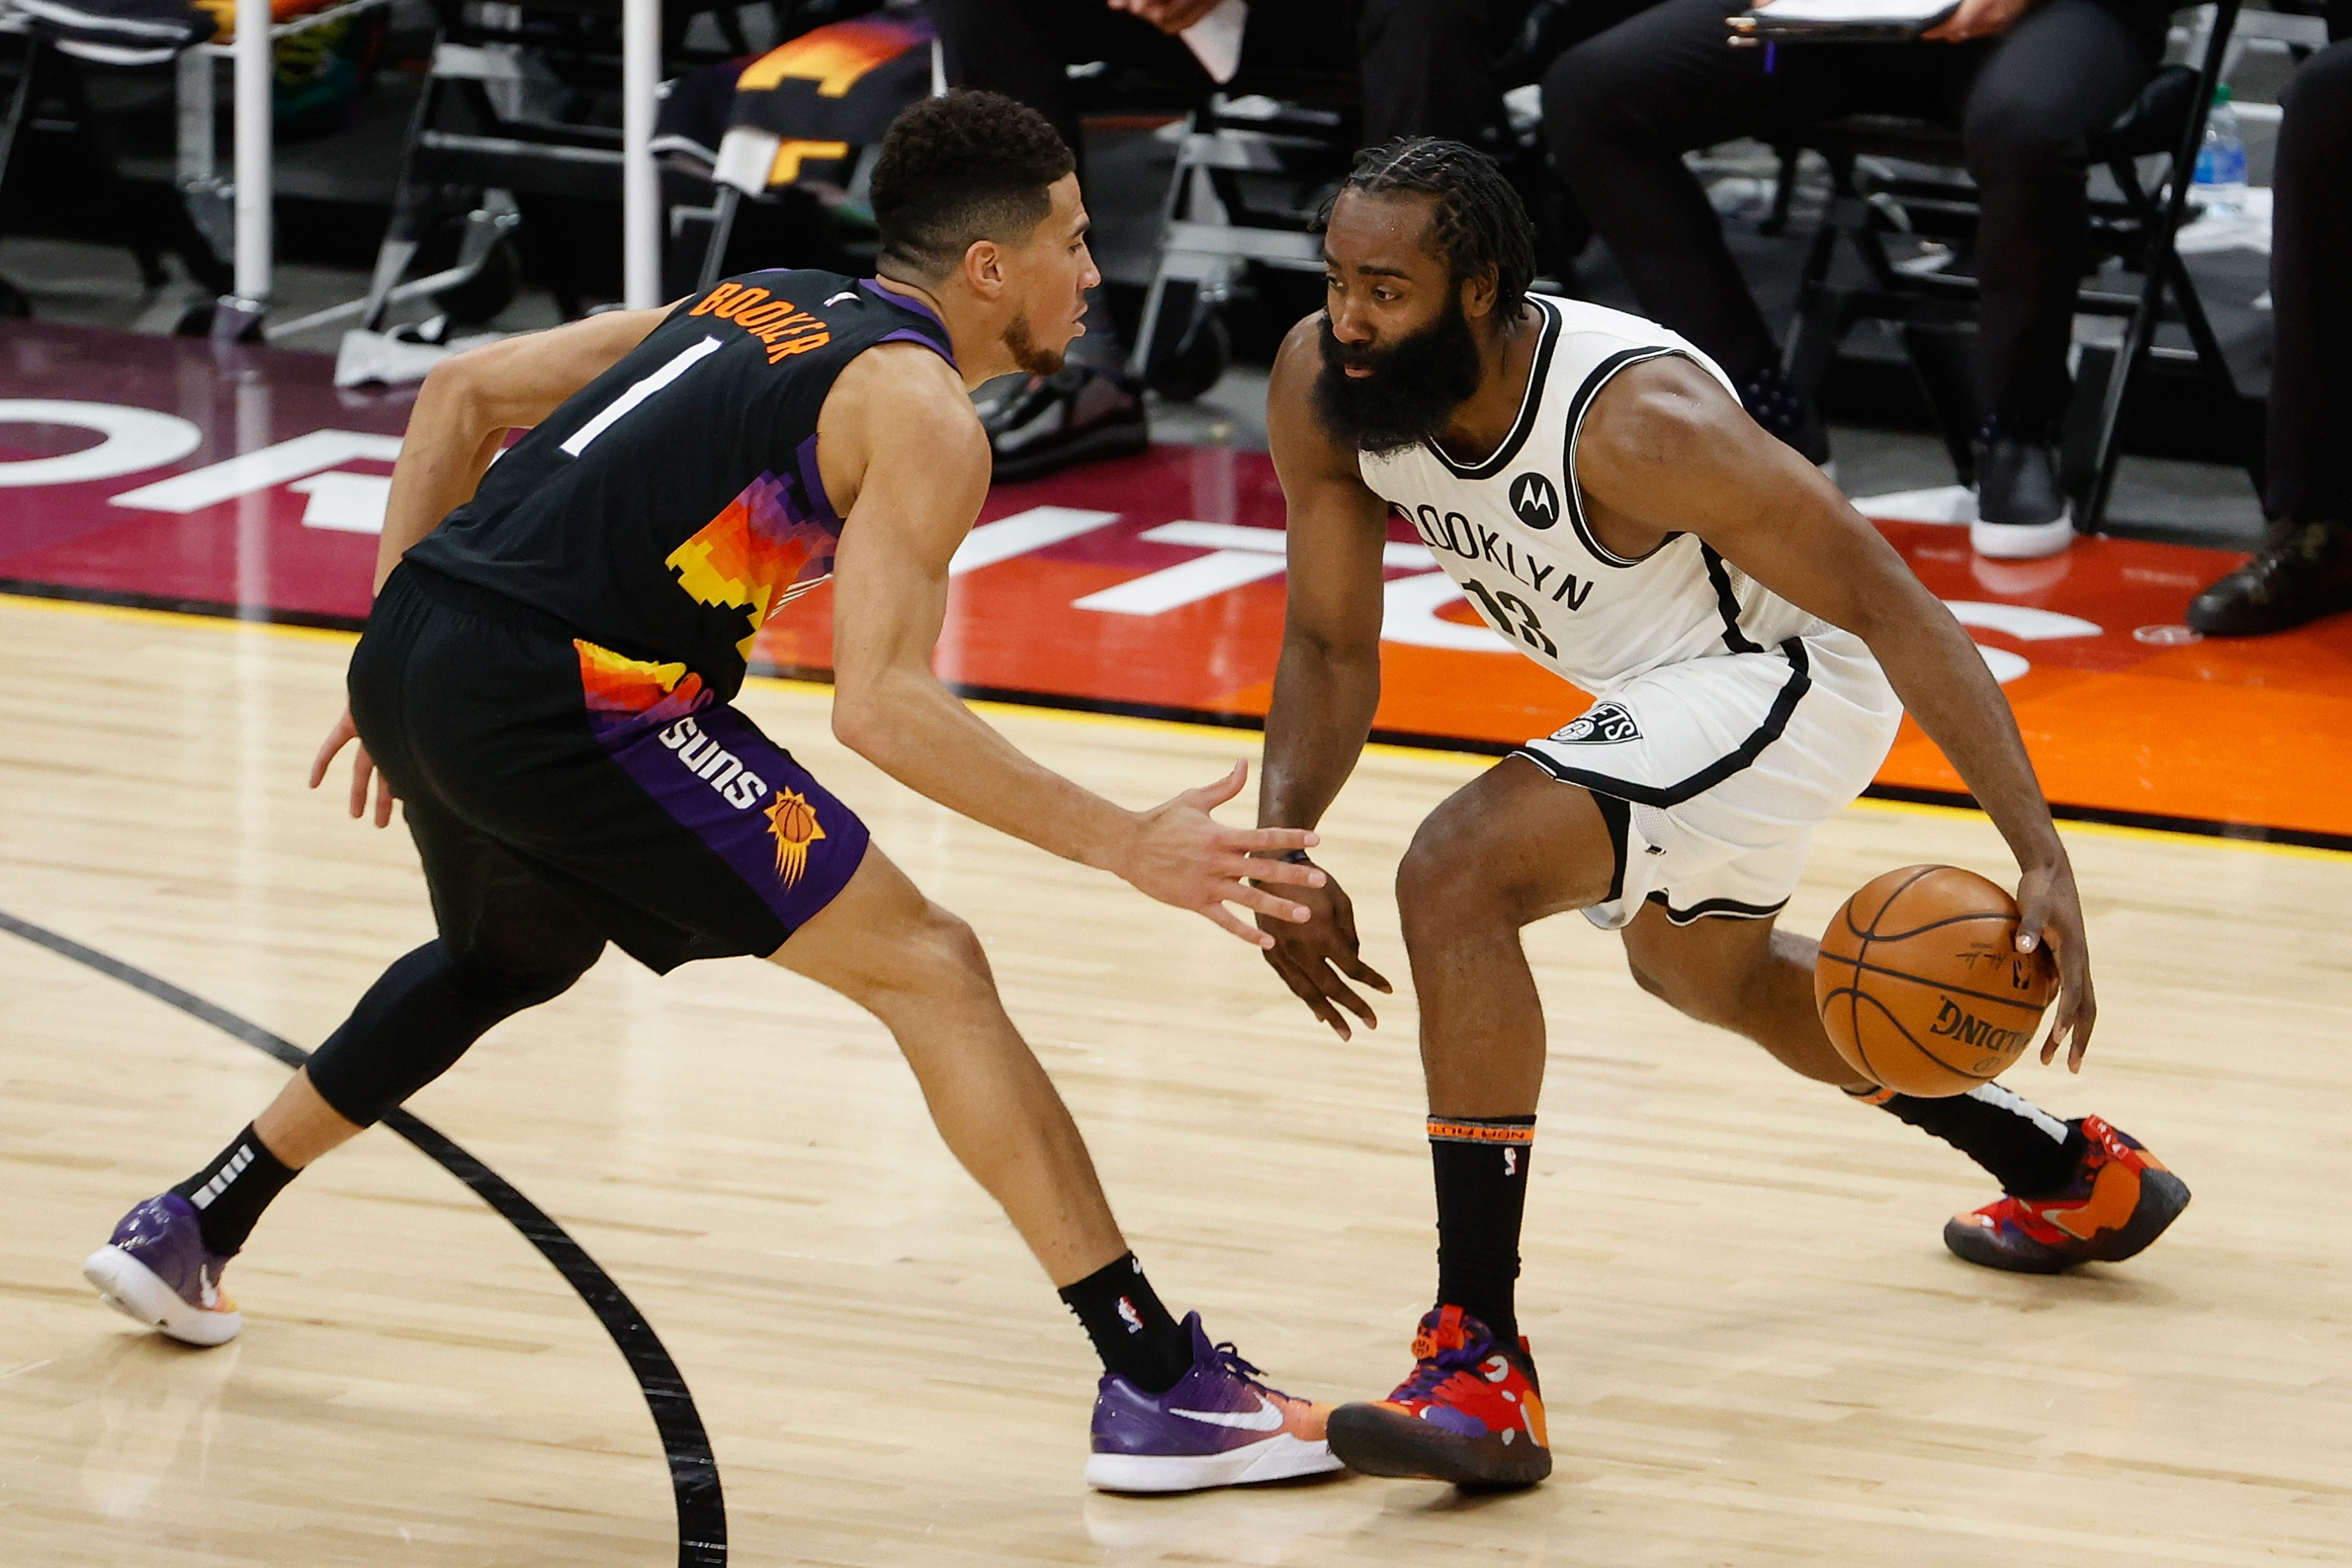 Ranking The Top 10 Best Point Guards For The 2021 NBA Season